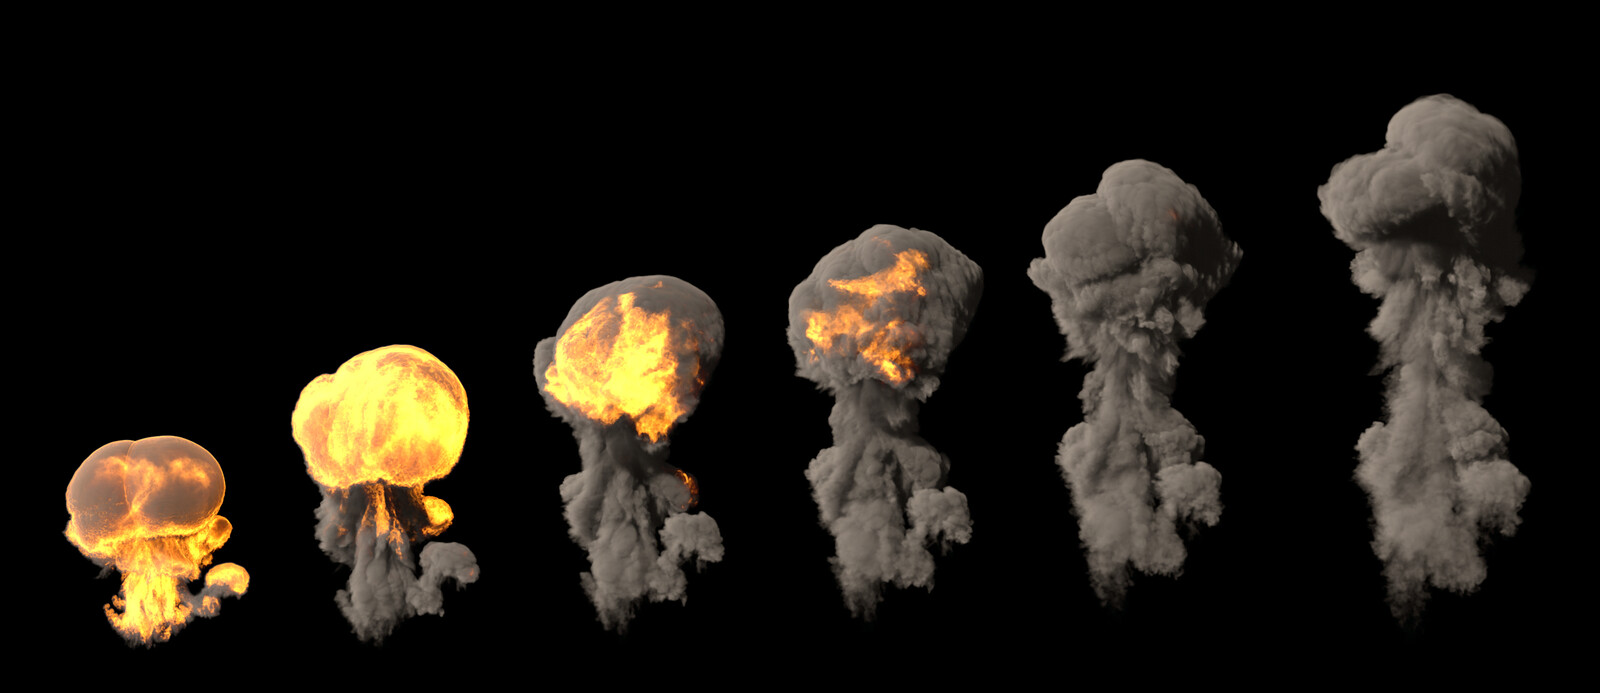 stages of a rapid explosion
